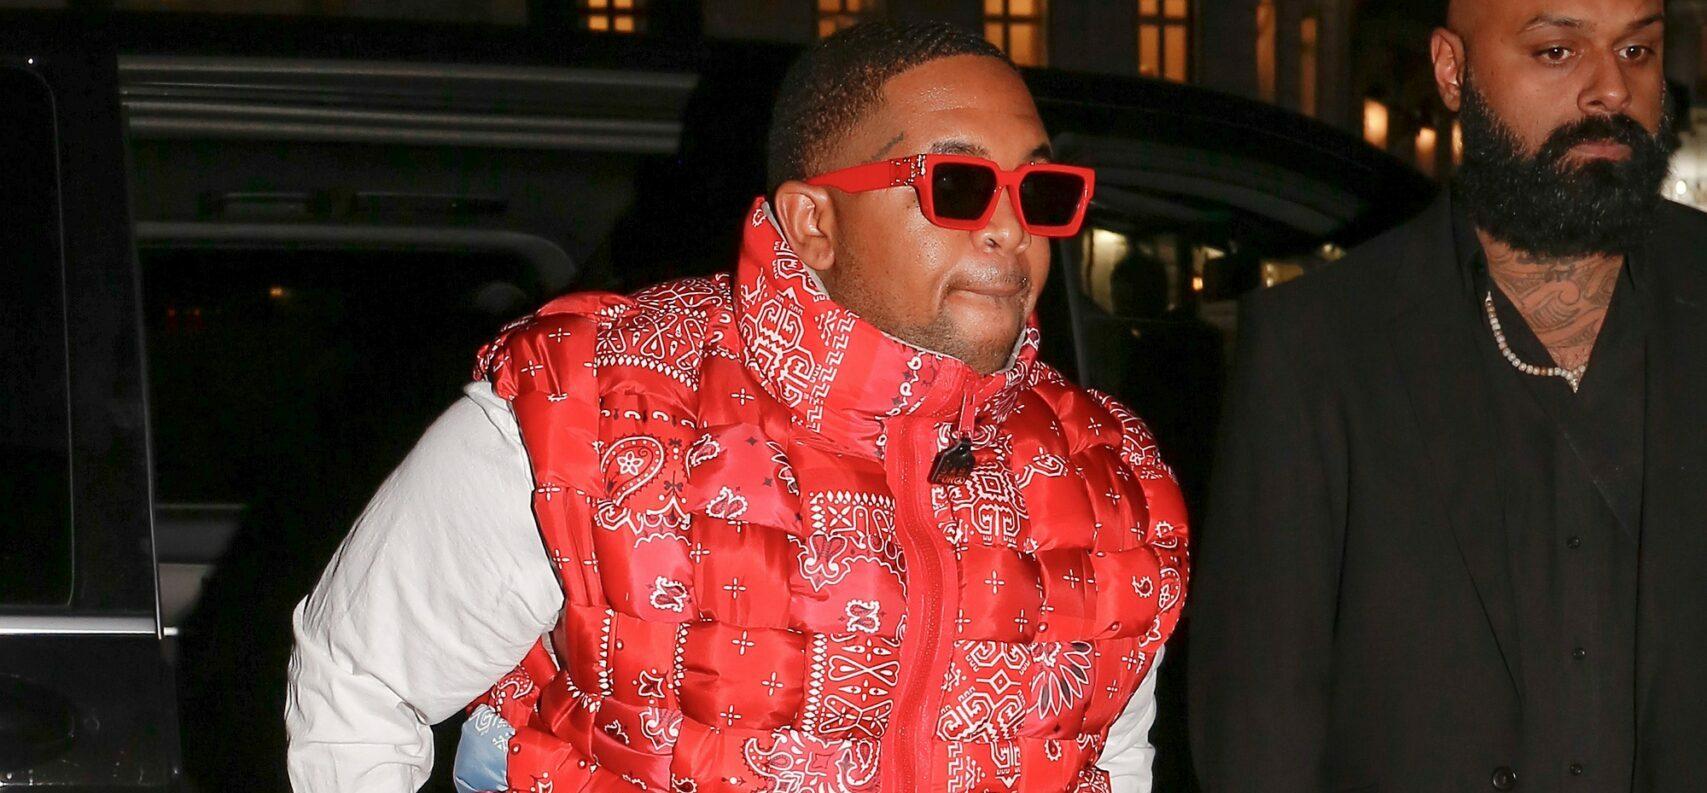 Dj Mustard arriving at Laundered Works Corp show during the Paris Fashion Week 2020